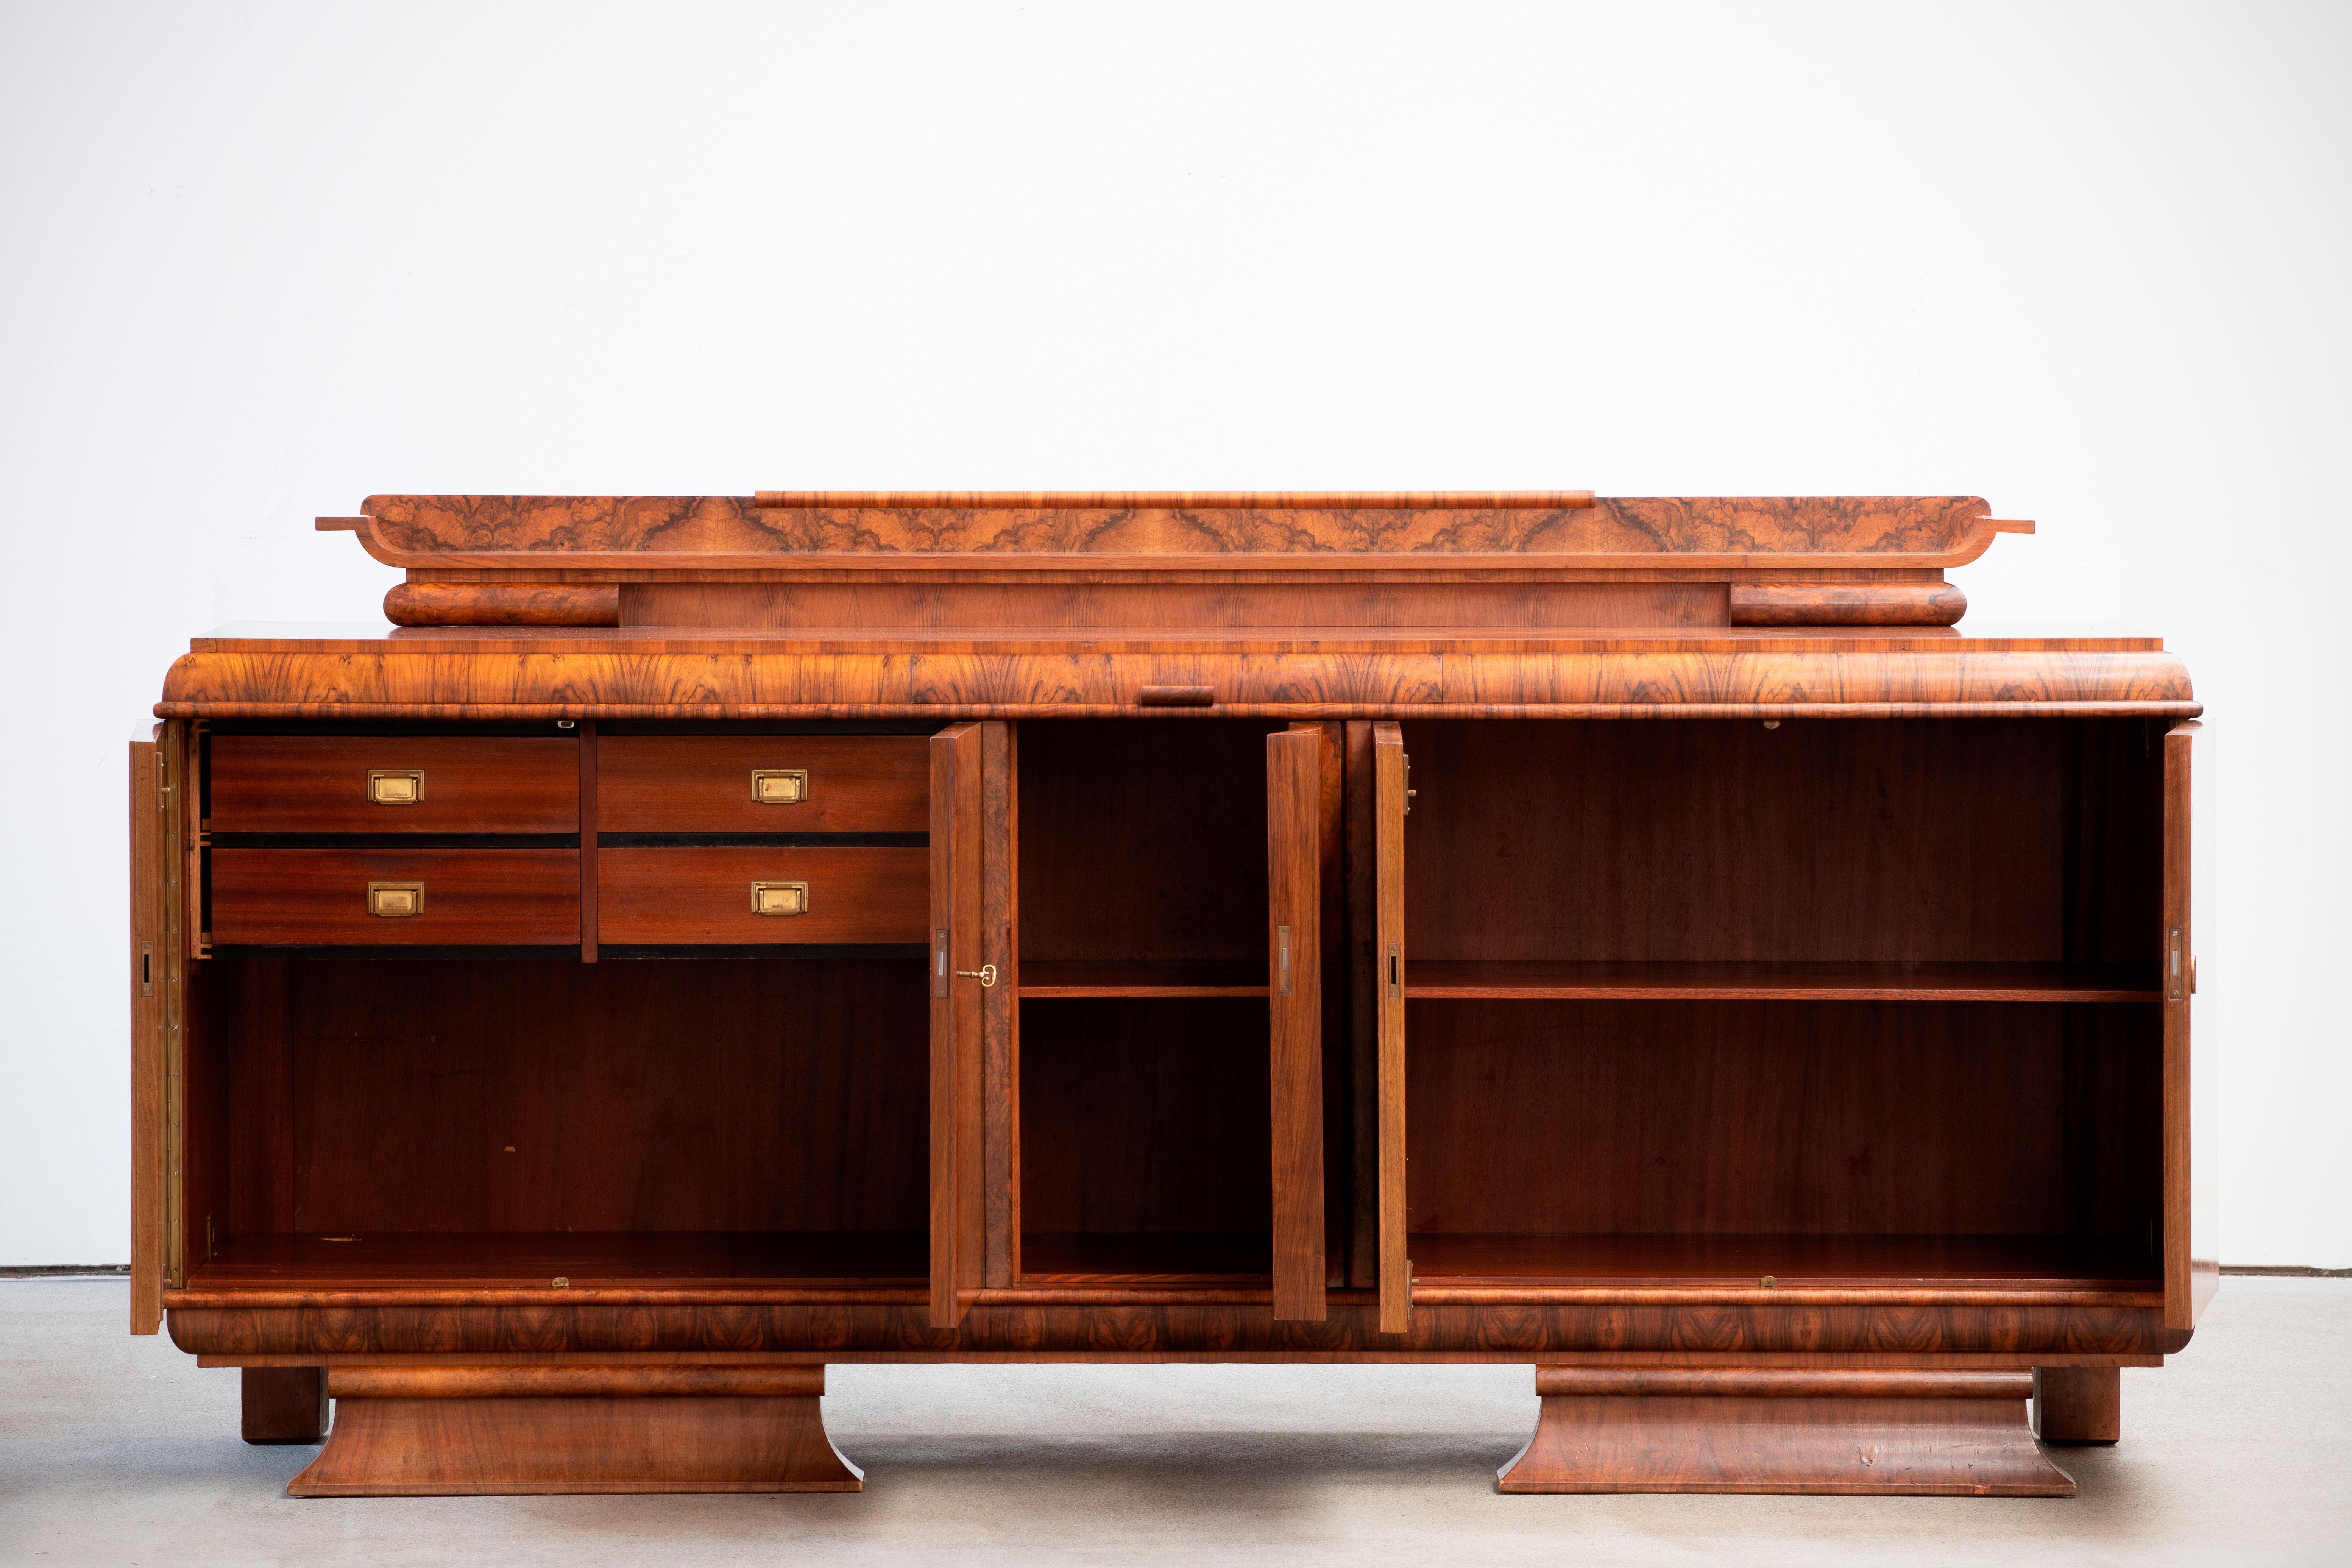 French Art Deco classic burr walnut sideboard, buffet, circa 1930s.
This luxurious piece was originally made in Strasbourg (France) in the 1930s.
The sideboard features four inside drawers and two shelves.
The curved lines of this sideboard and